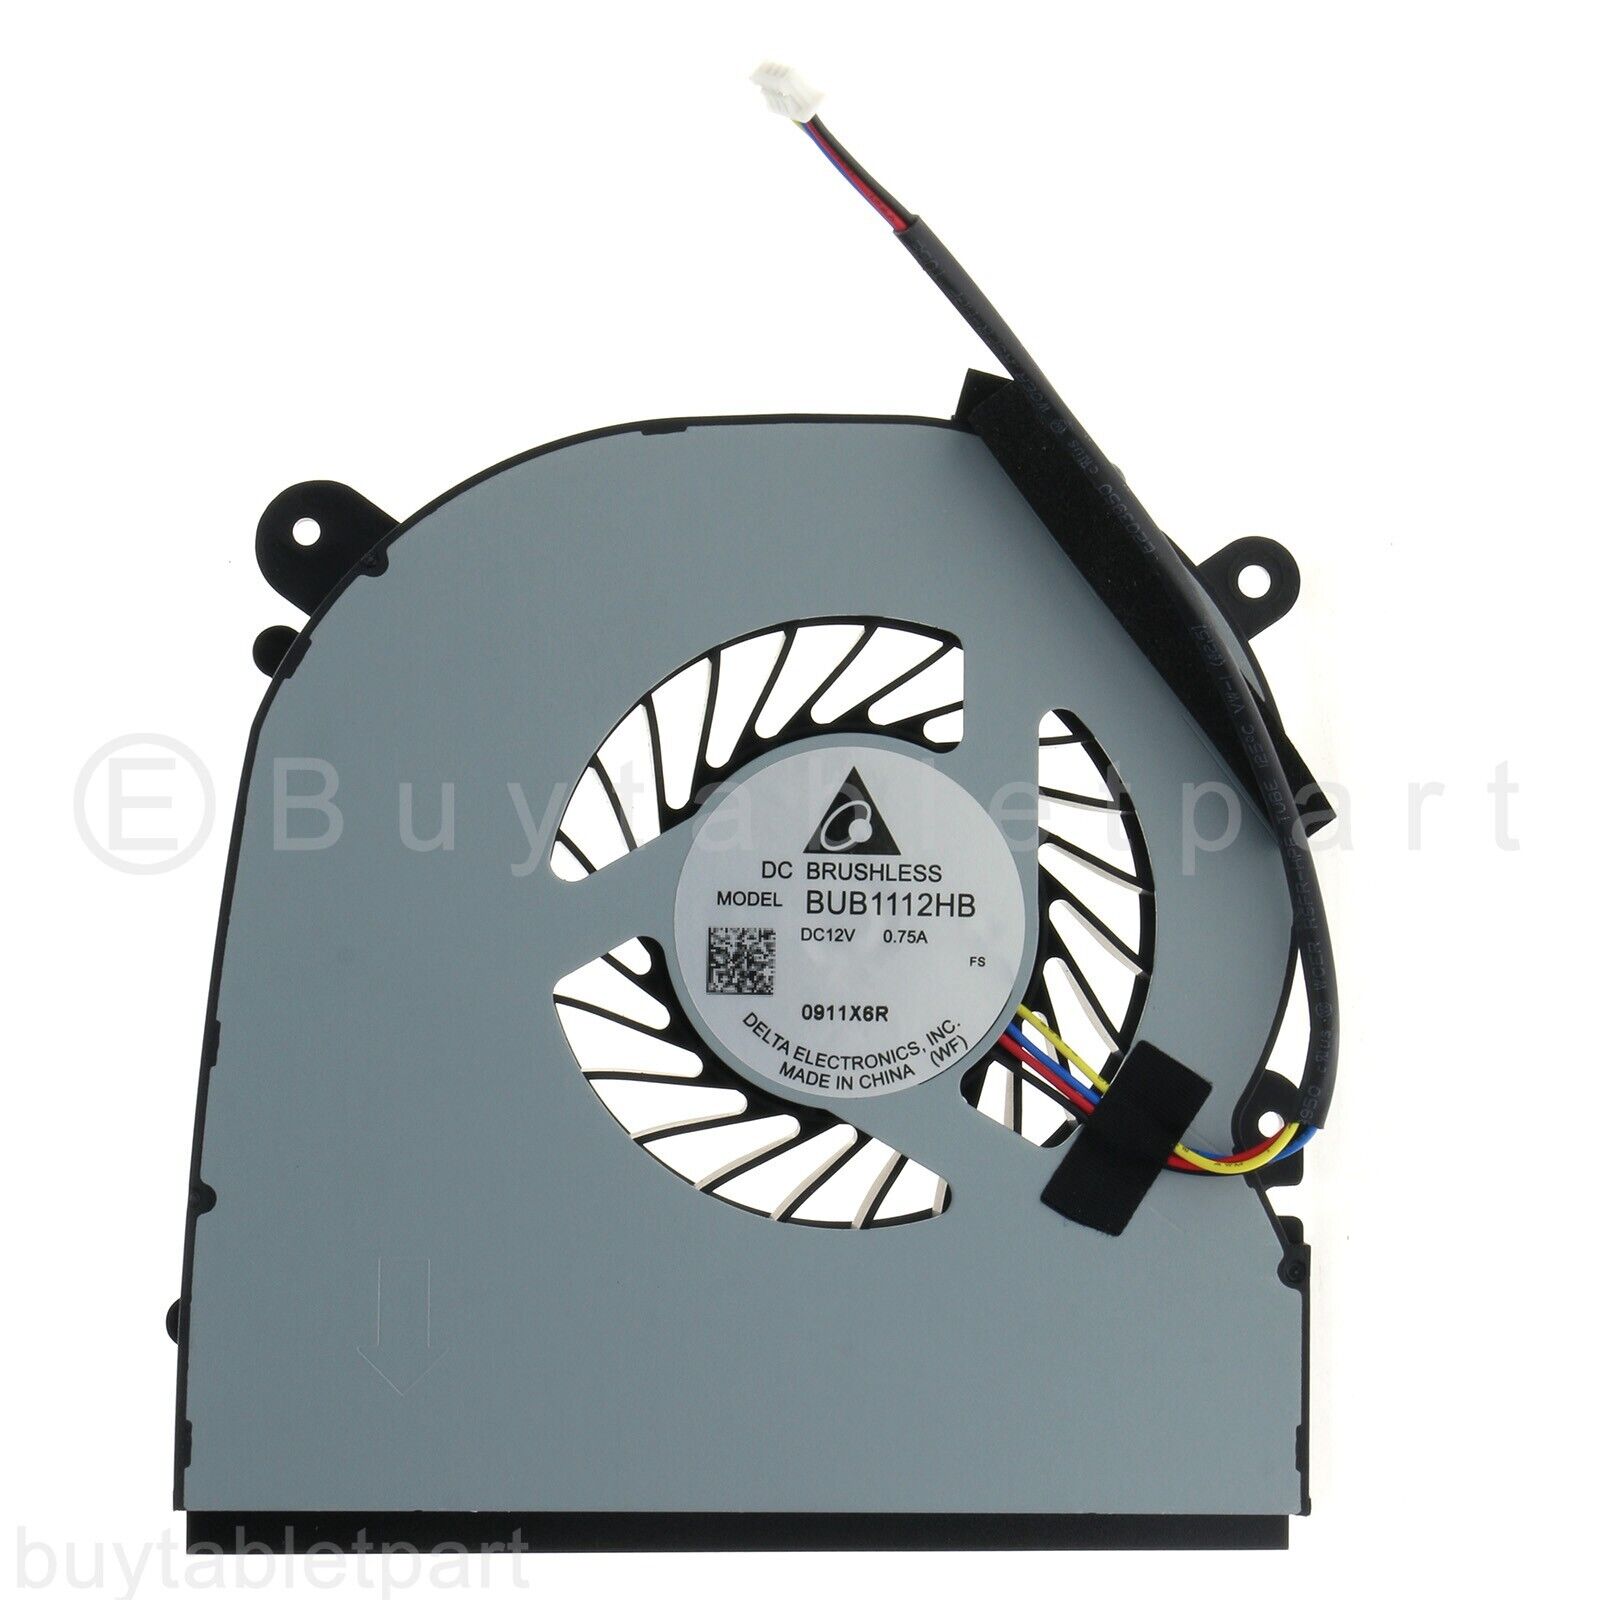 NEW Right CPU Cooling Fan For Intel Hades Canyon NUC NUC8i7HVK NUC8i7HNK